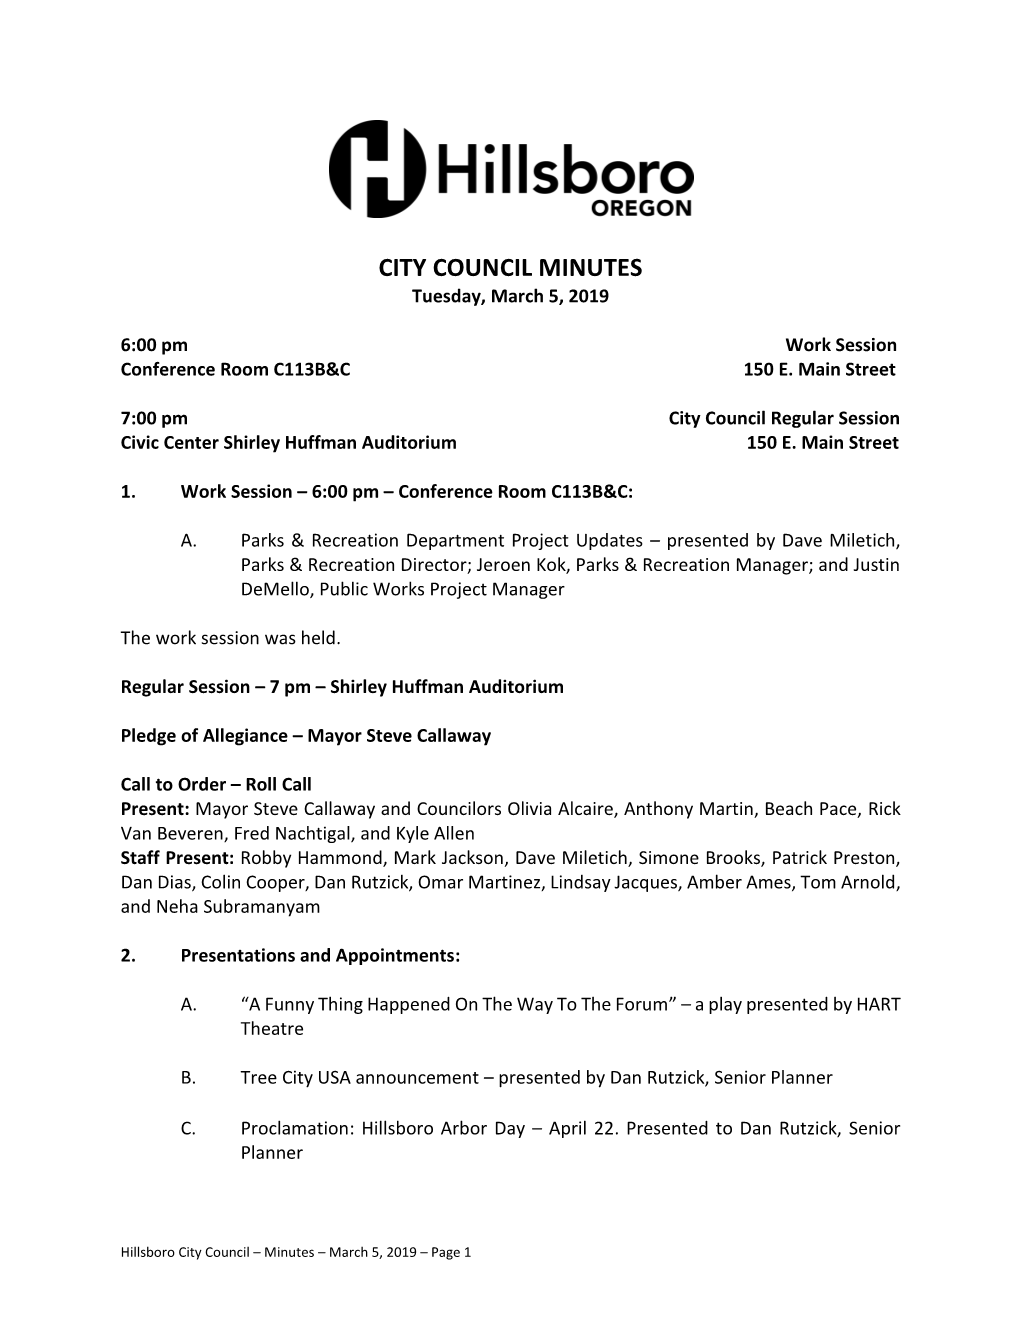 CITY COUNCIL MINUTES Tuesday, March 5, 2019